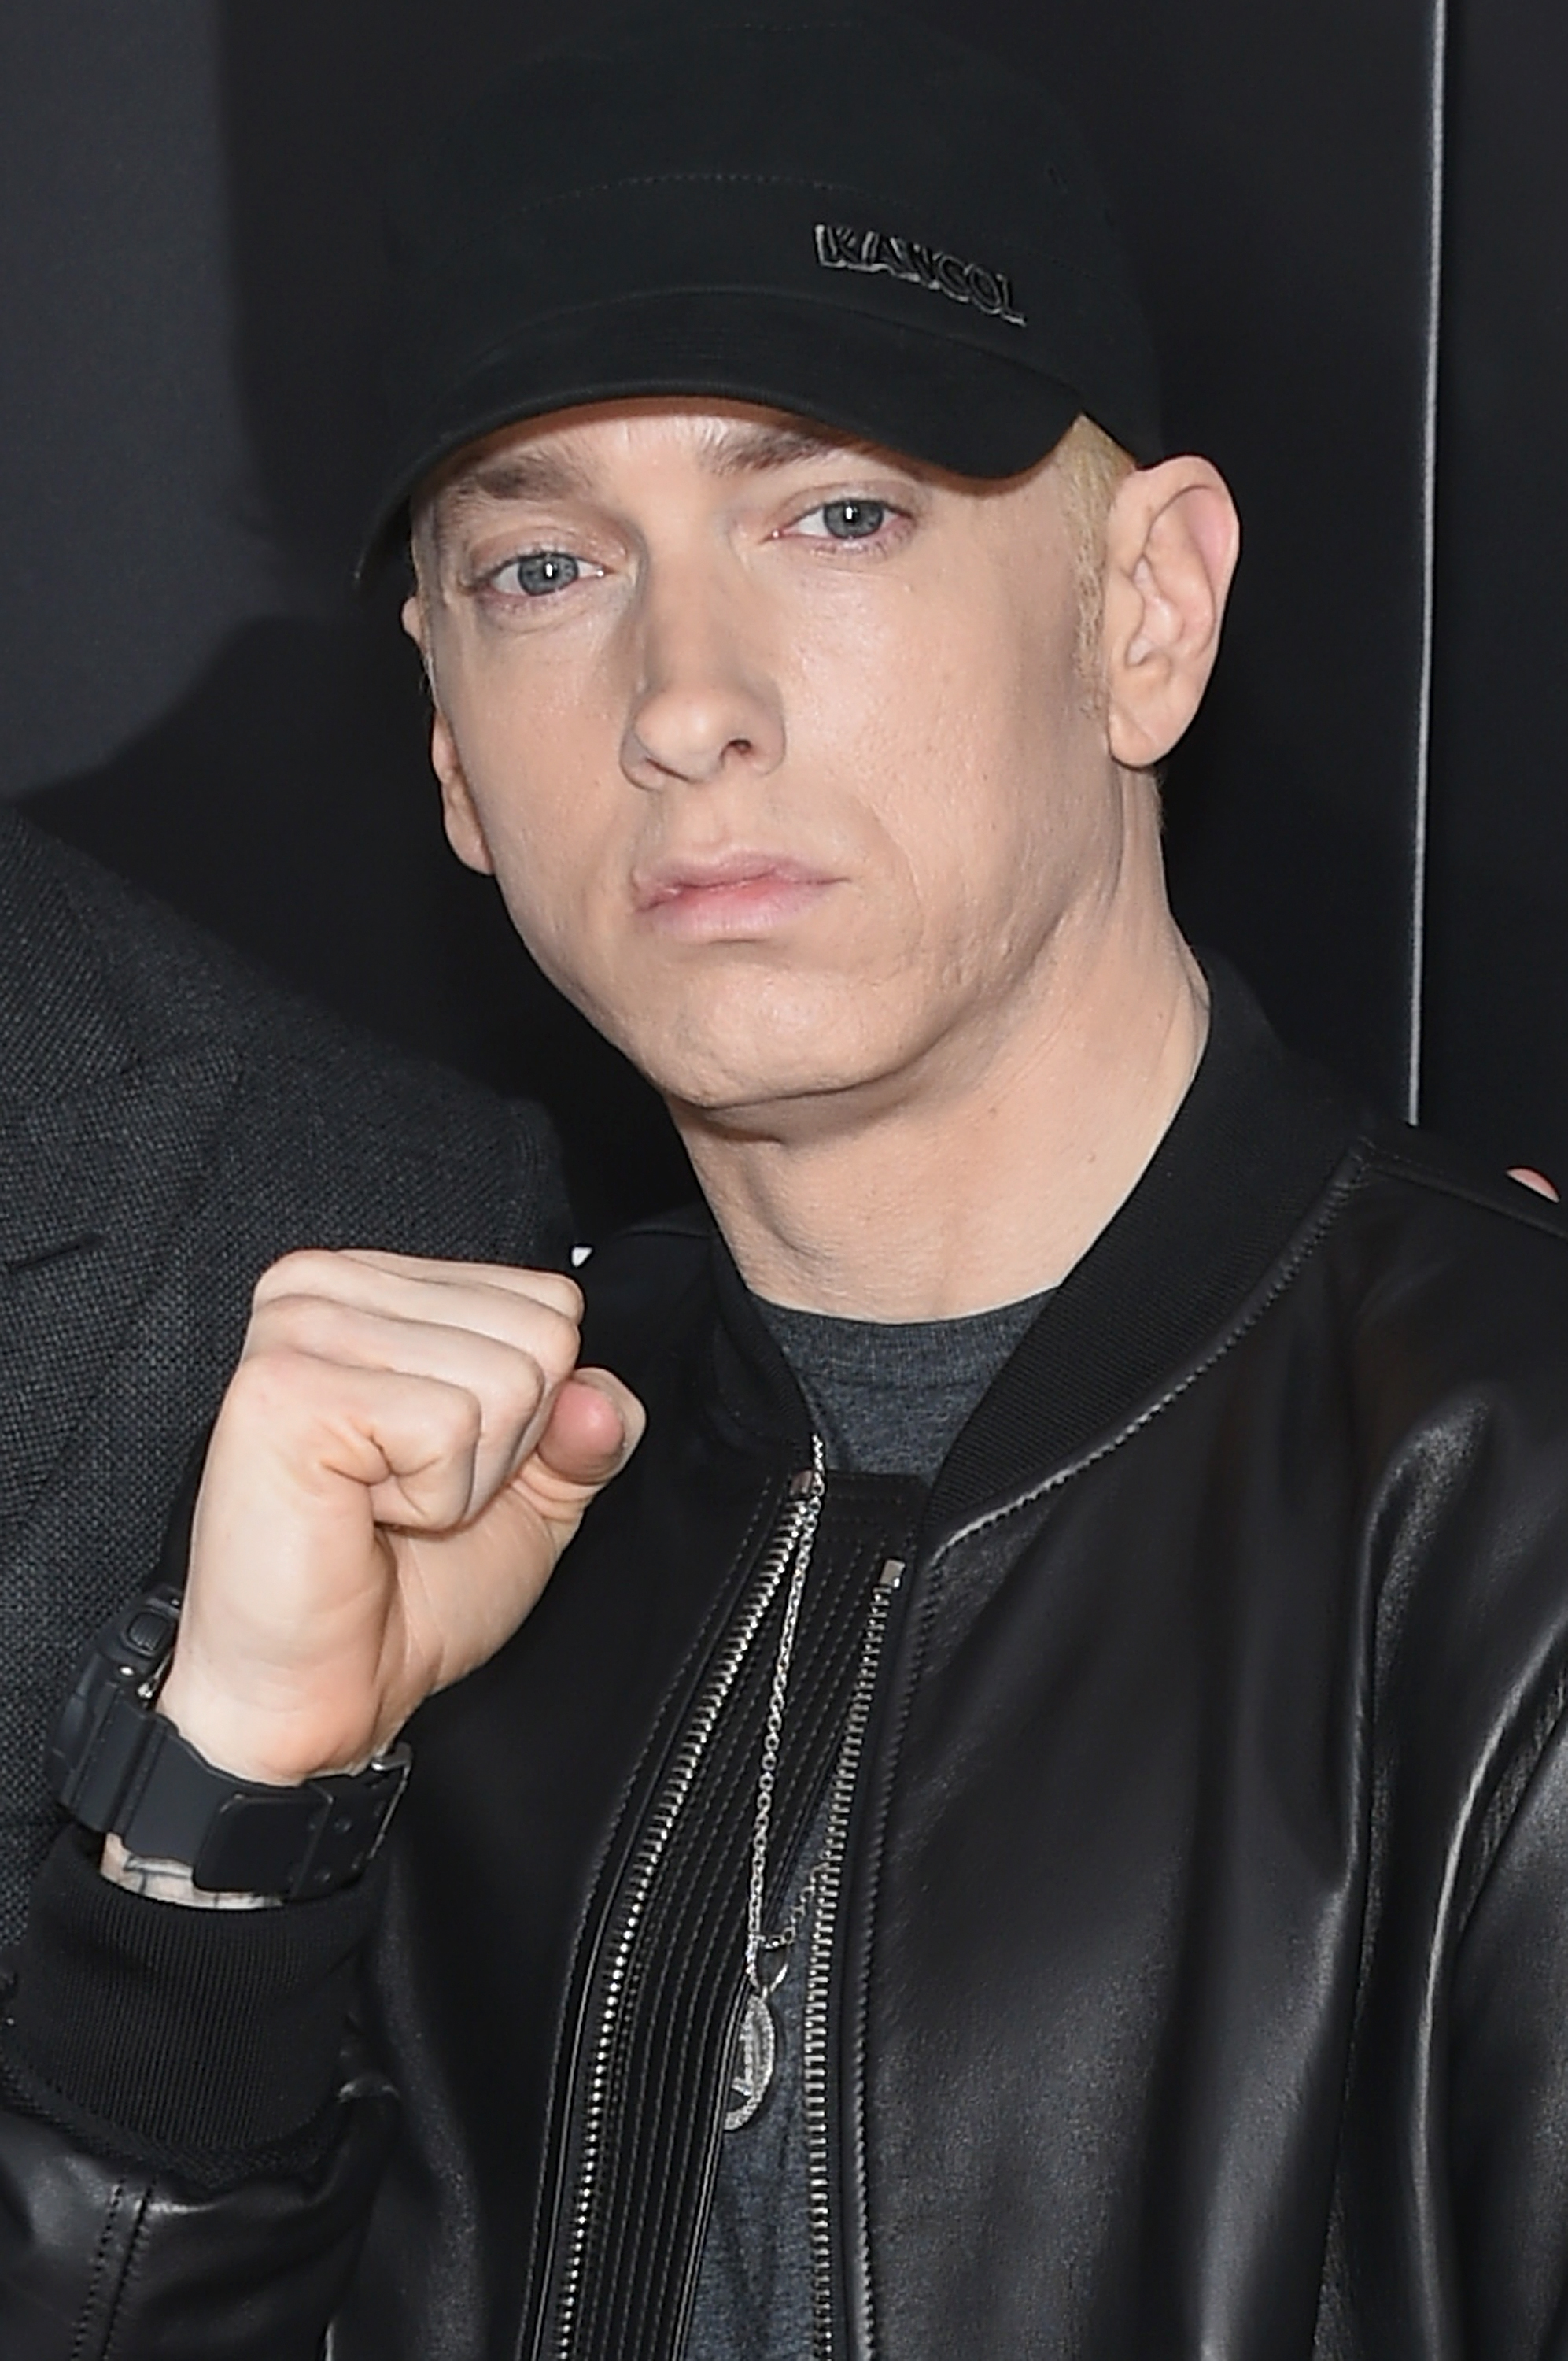 Eminem at the premiere of "Southpaw" in New York City on July 20, 2015 | Source: Getty Images